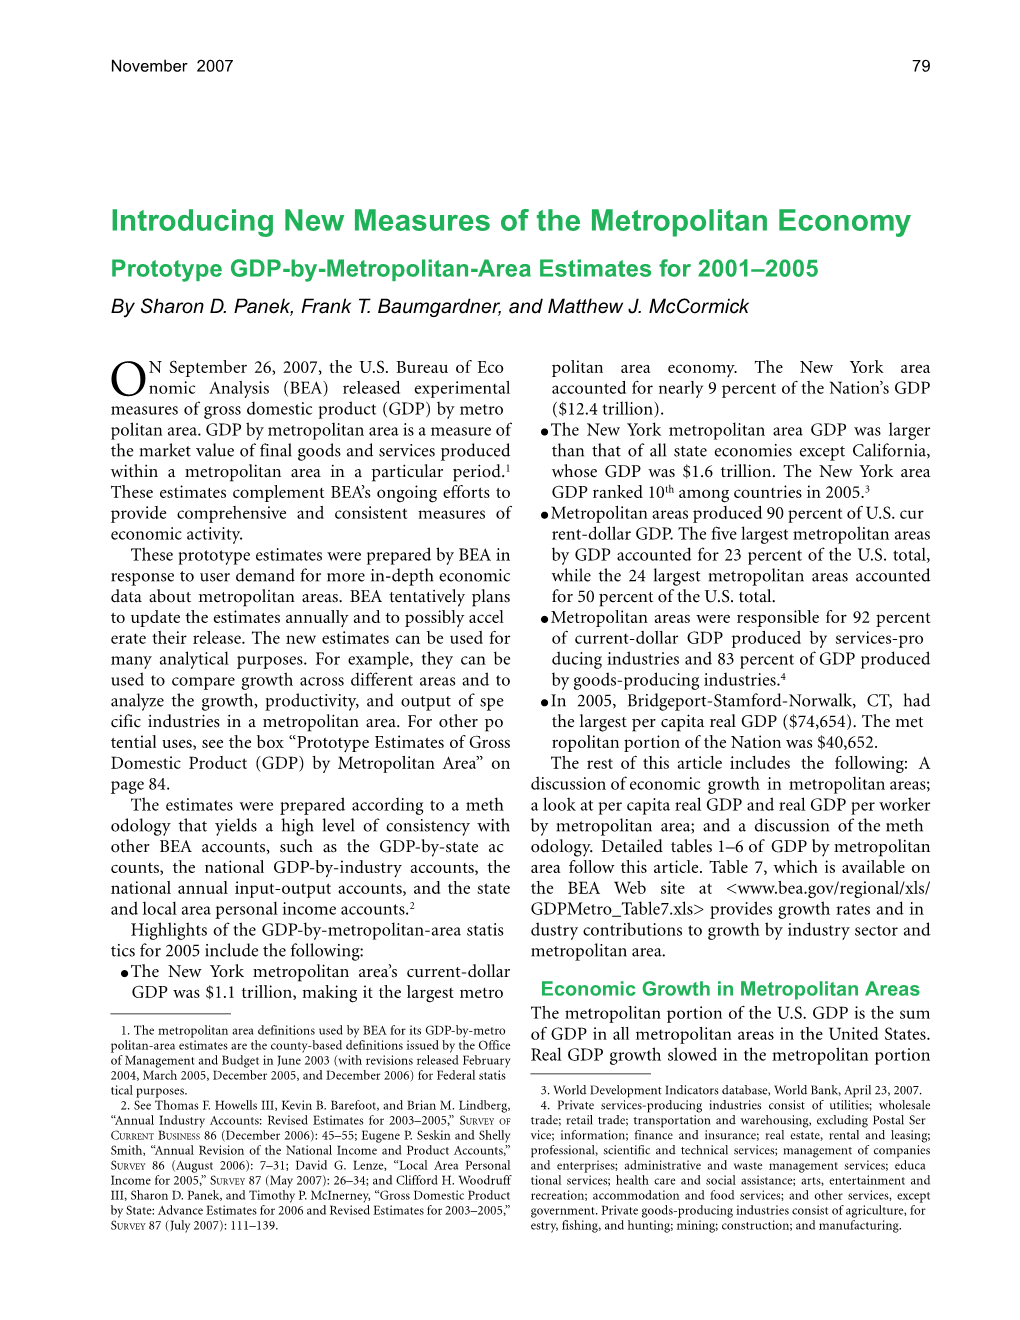 Introducing New Measures of the Metropolitan Economy Prototype GDP-By-Metropolitan-Area Estimates for 2001–2005 by Sharon D